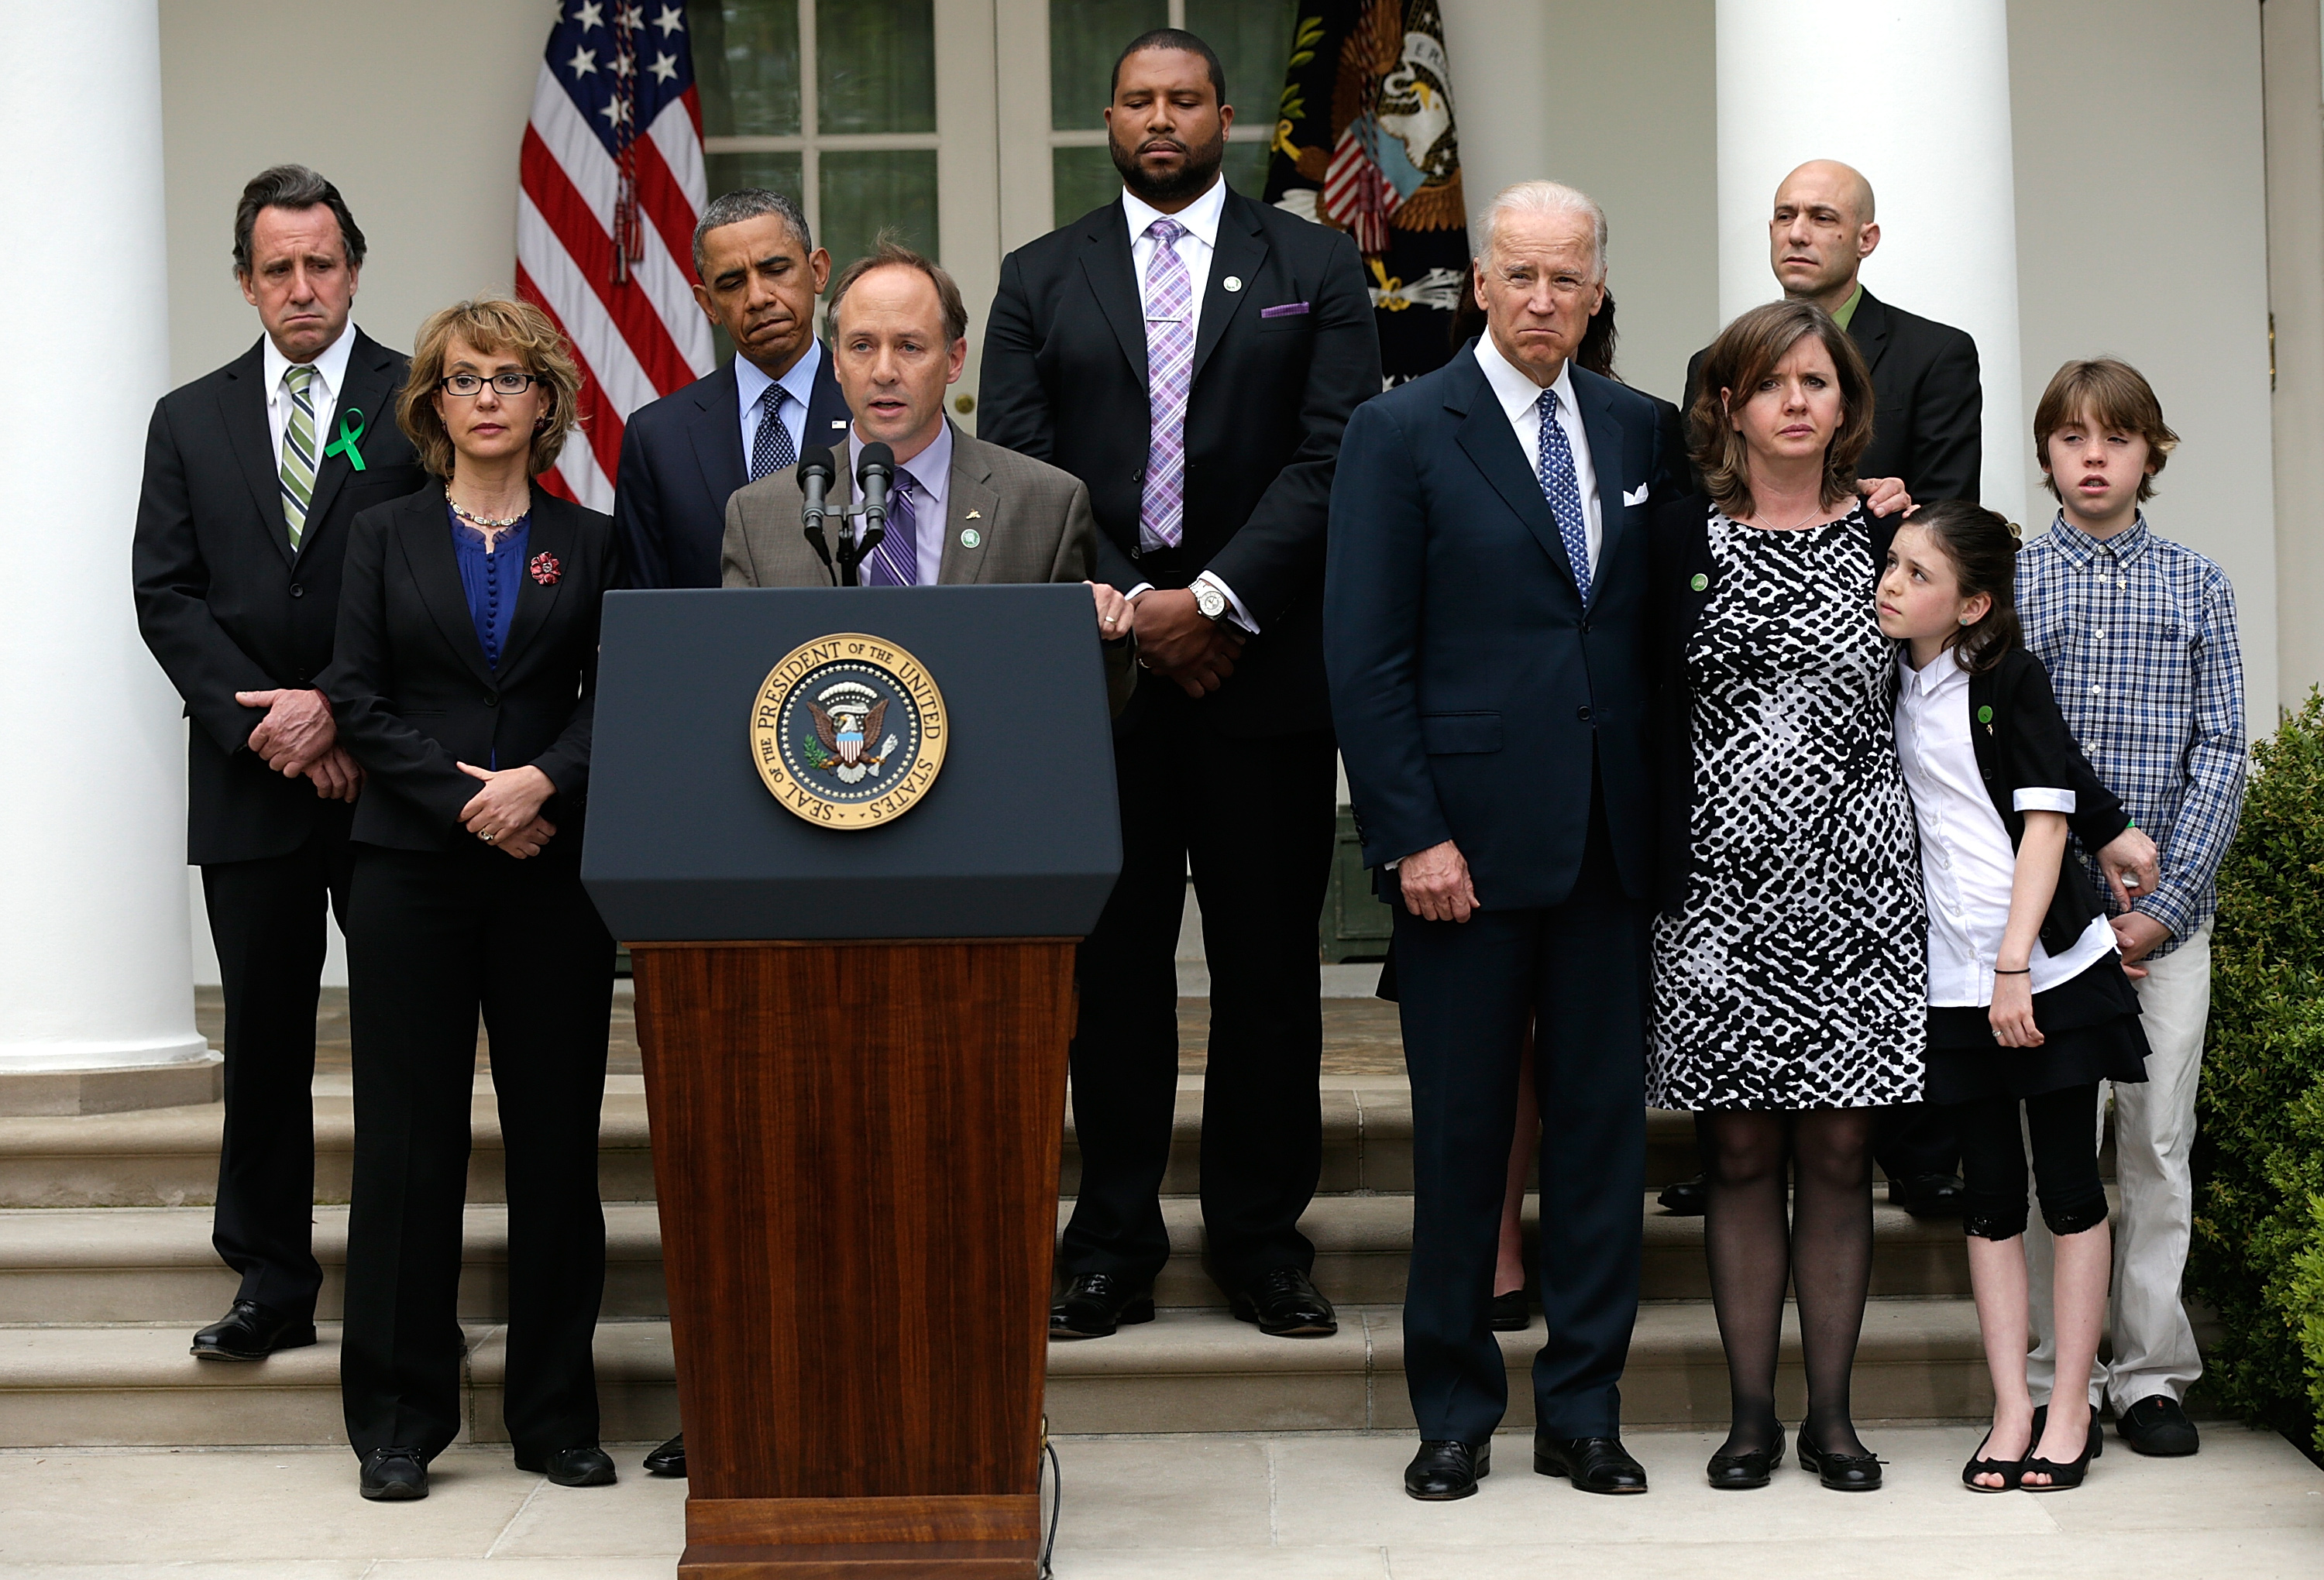 Mark Barden, the father of a victim at Sandy Hook Elementary School, joins U.S. President Barack Obama and Vice President Joe Biden in making a statement on gun violence in the Rose Garden of the White House on April 17, 2013 in Washington, DC. . Also pictured are family members of gun violence victims, and victims of gun violence, Gabby Giffords, Jimmy Greene, Nicole Hockley, Jeremy Richman, Neil Heslin, Jackie Barden, Natalie Barden and James Barden.  (Getty)